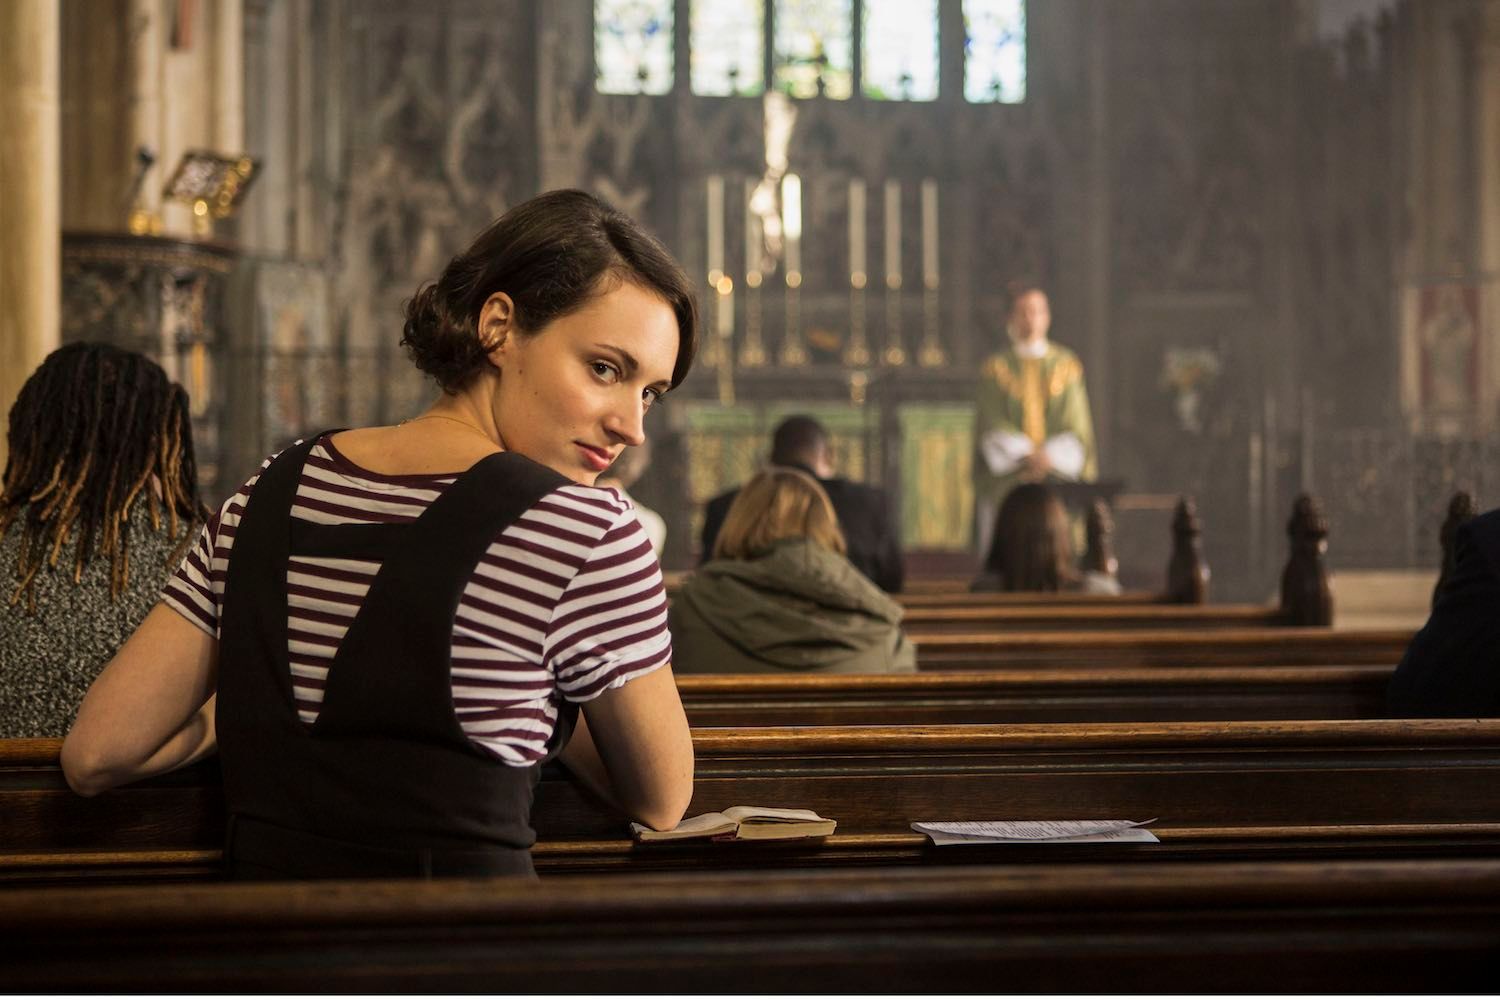 Perfect Imperfections of Fleabag Season 2